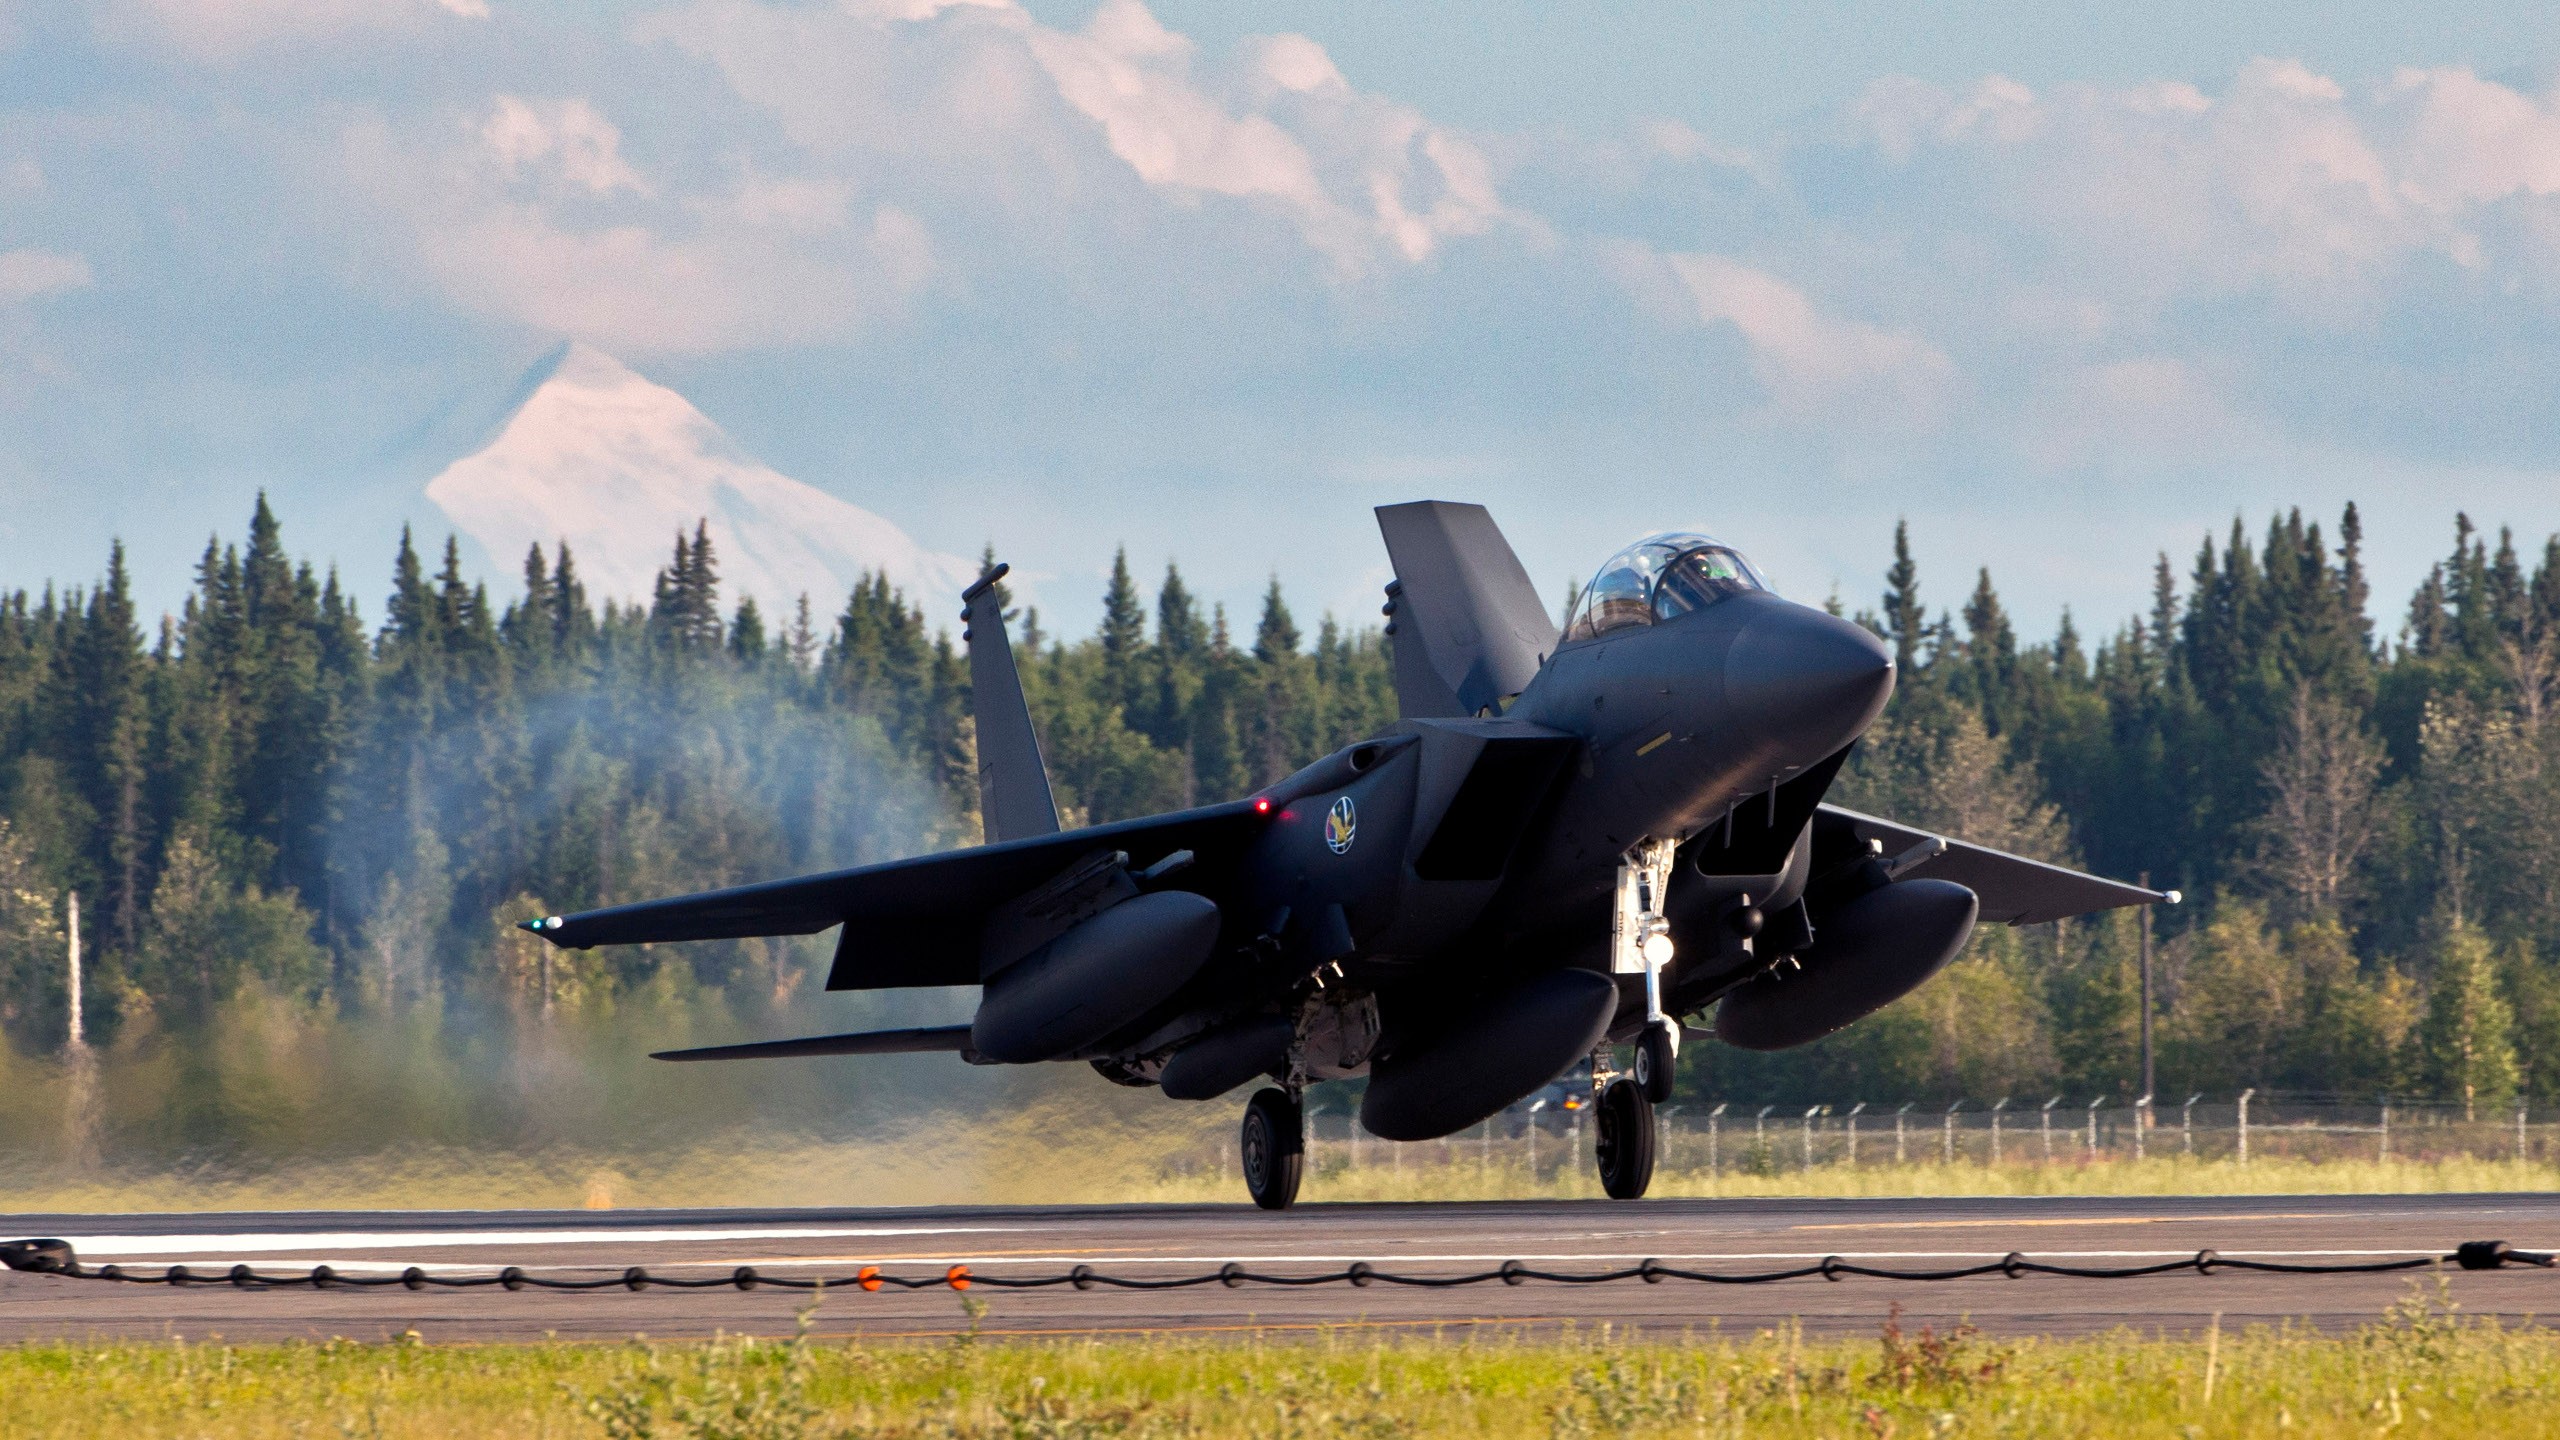 General 2560x1440 military military aircraft jet fighter F-15 Eagle Republic of Korea Armed Forces aircraft military vehicle ROK Air Force take-off Alaska military training jets 2013 (Year) military base runway vehicle sky clouds trees